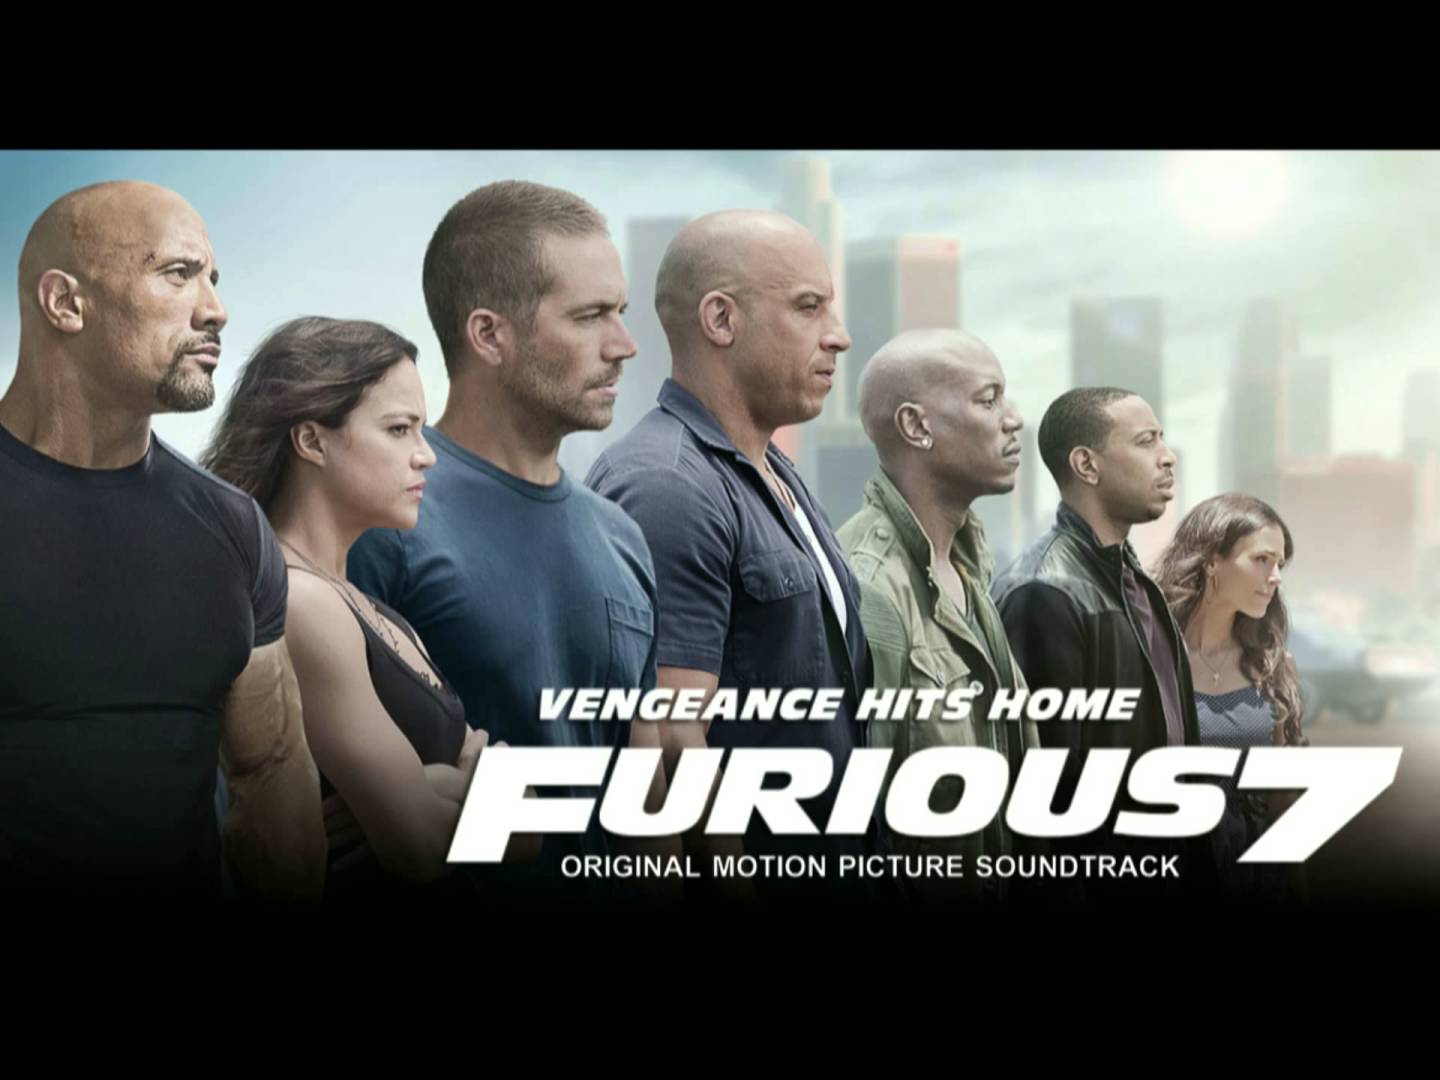 Dillon Francis x DJ Snake - Get Low ( Fast and Furious 7 OST )